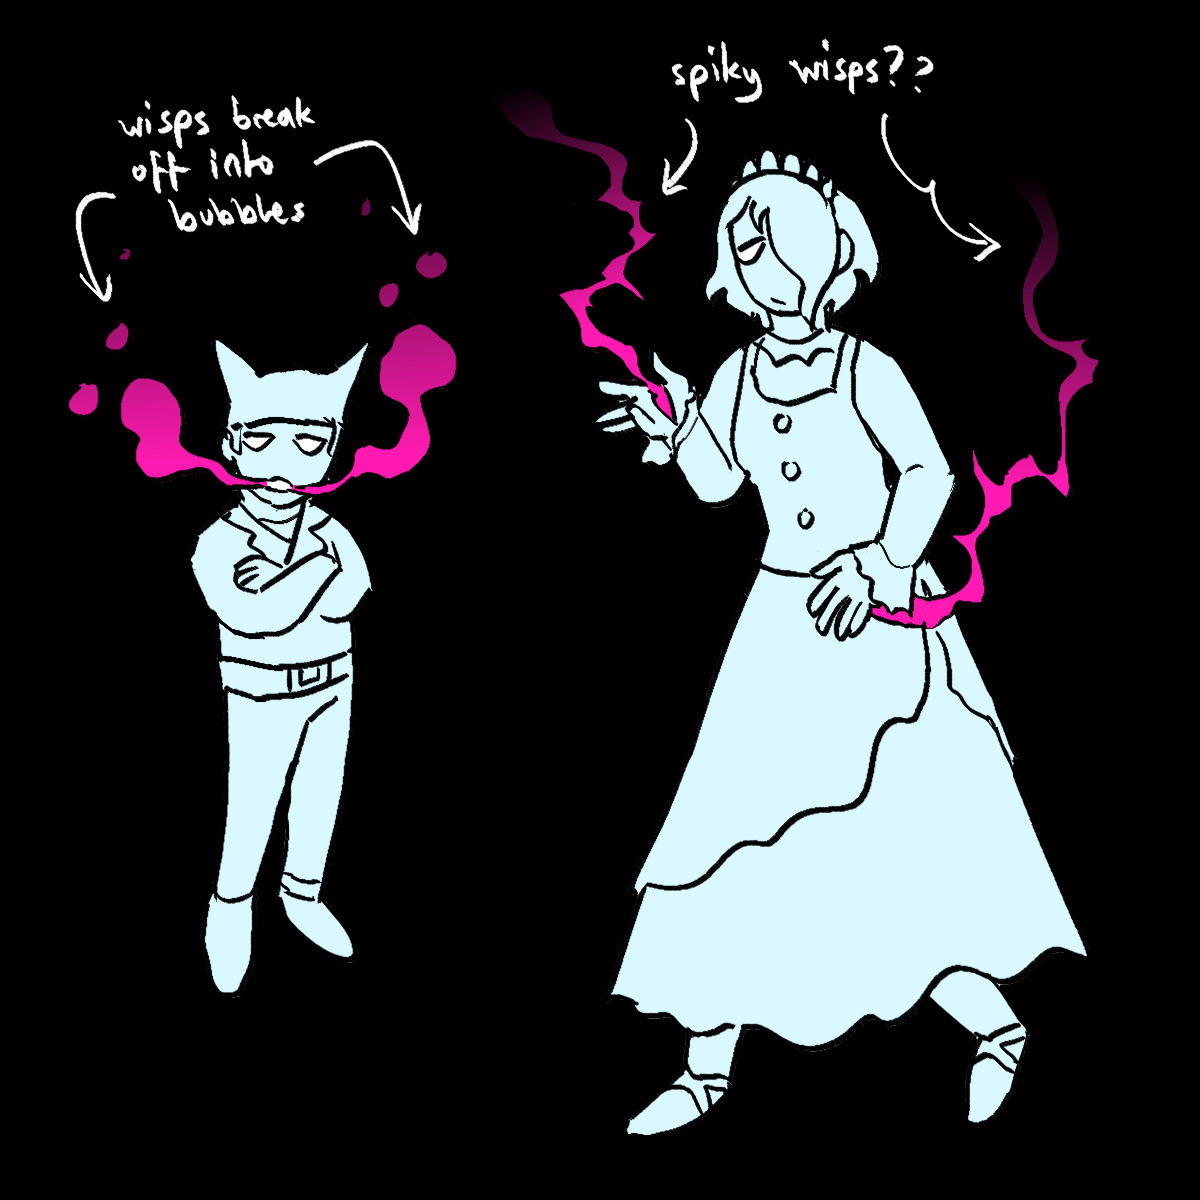 a drawing of ryoma and kirumi as ghosts. arrows point at ryoma's wisps pouring from
		his mouth with the text 'wisps break off into bubbles'. arrows point at kirumi's wisps coming from cuts in her hands
		with the text 'spiky wisps??'.